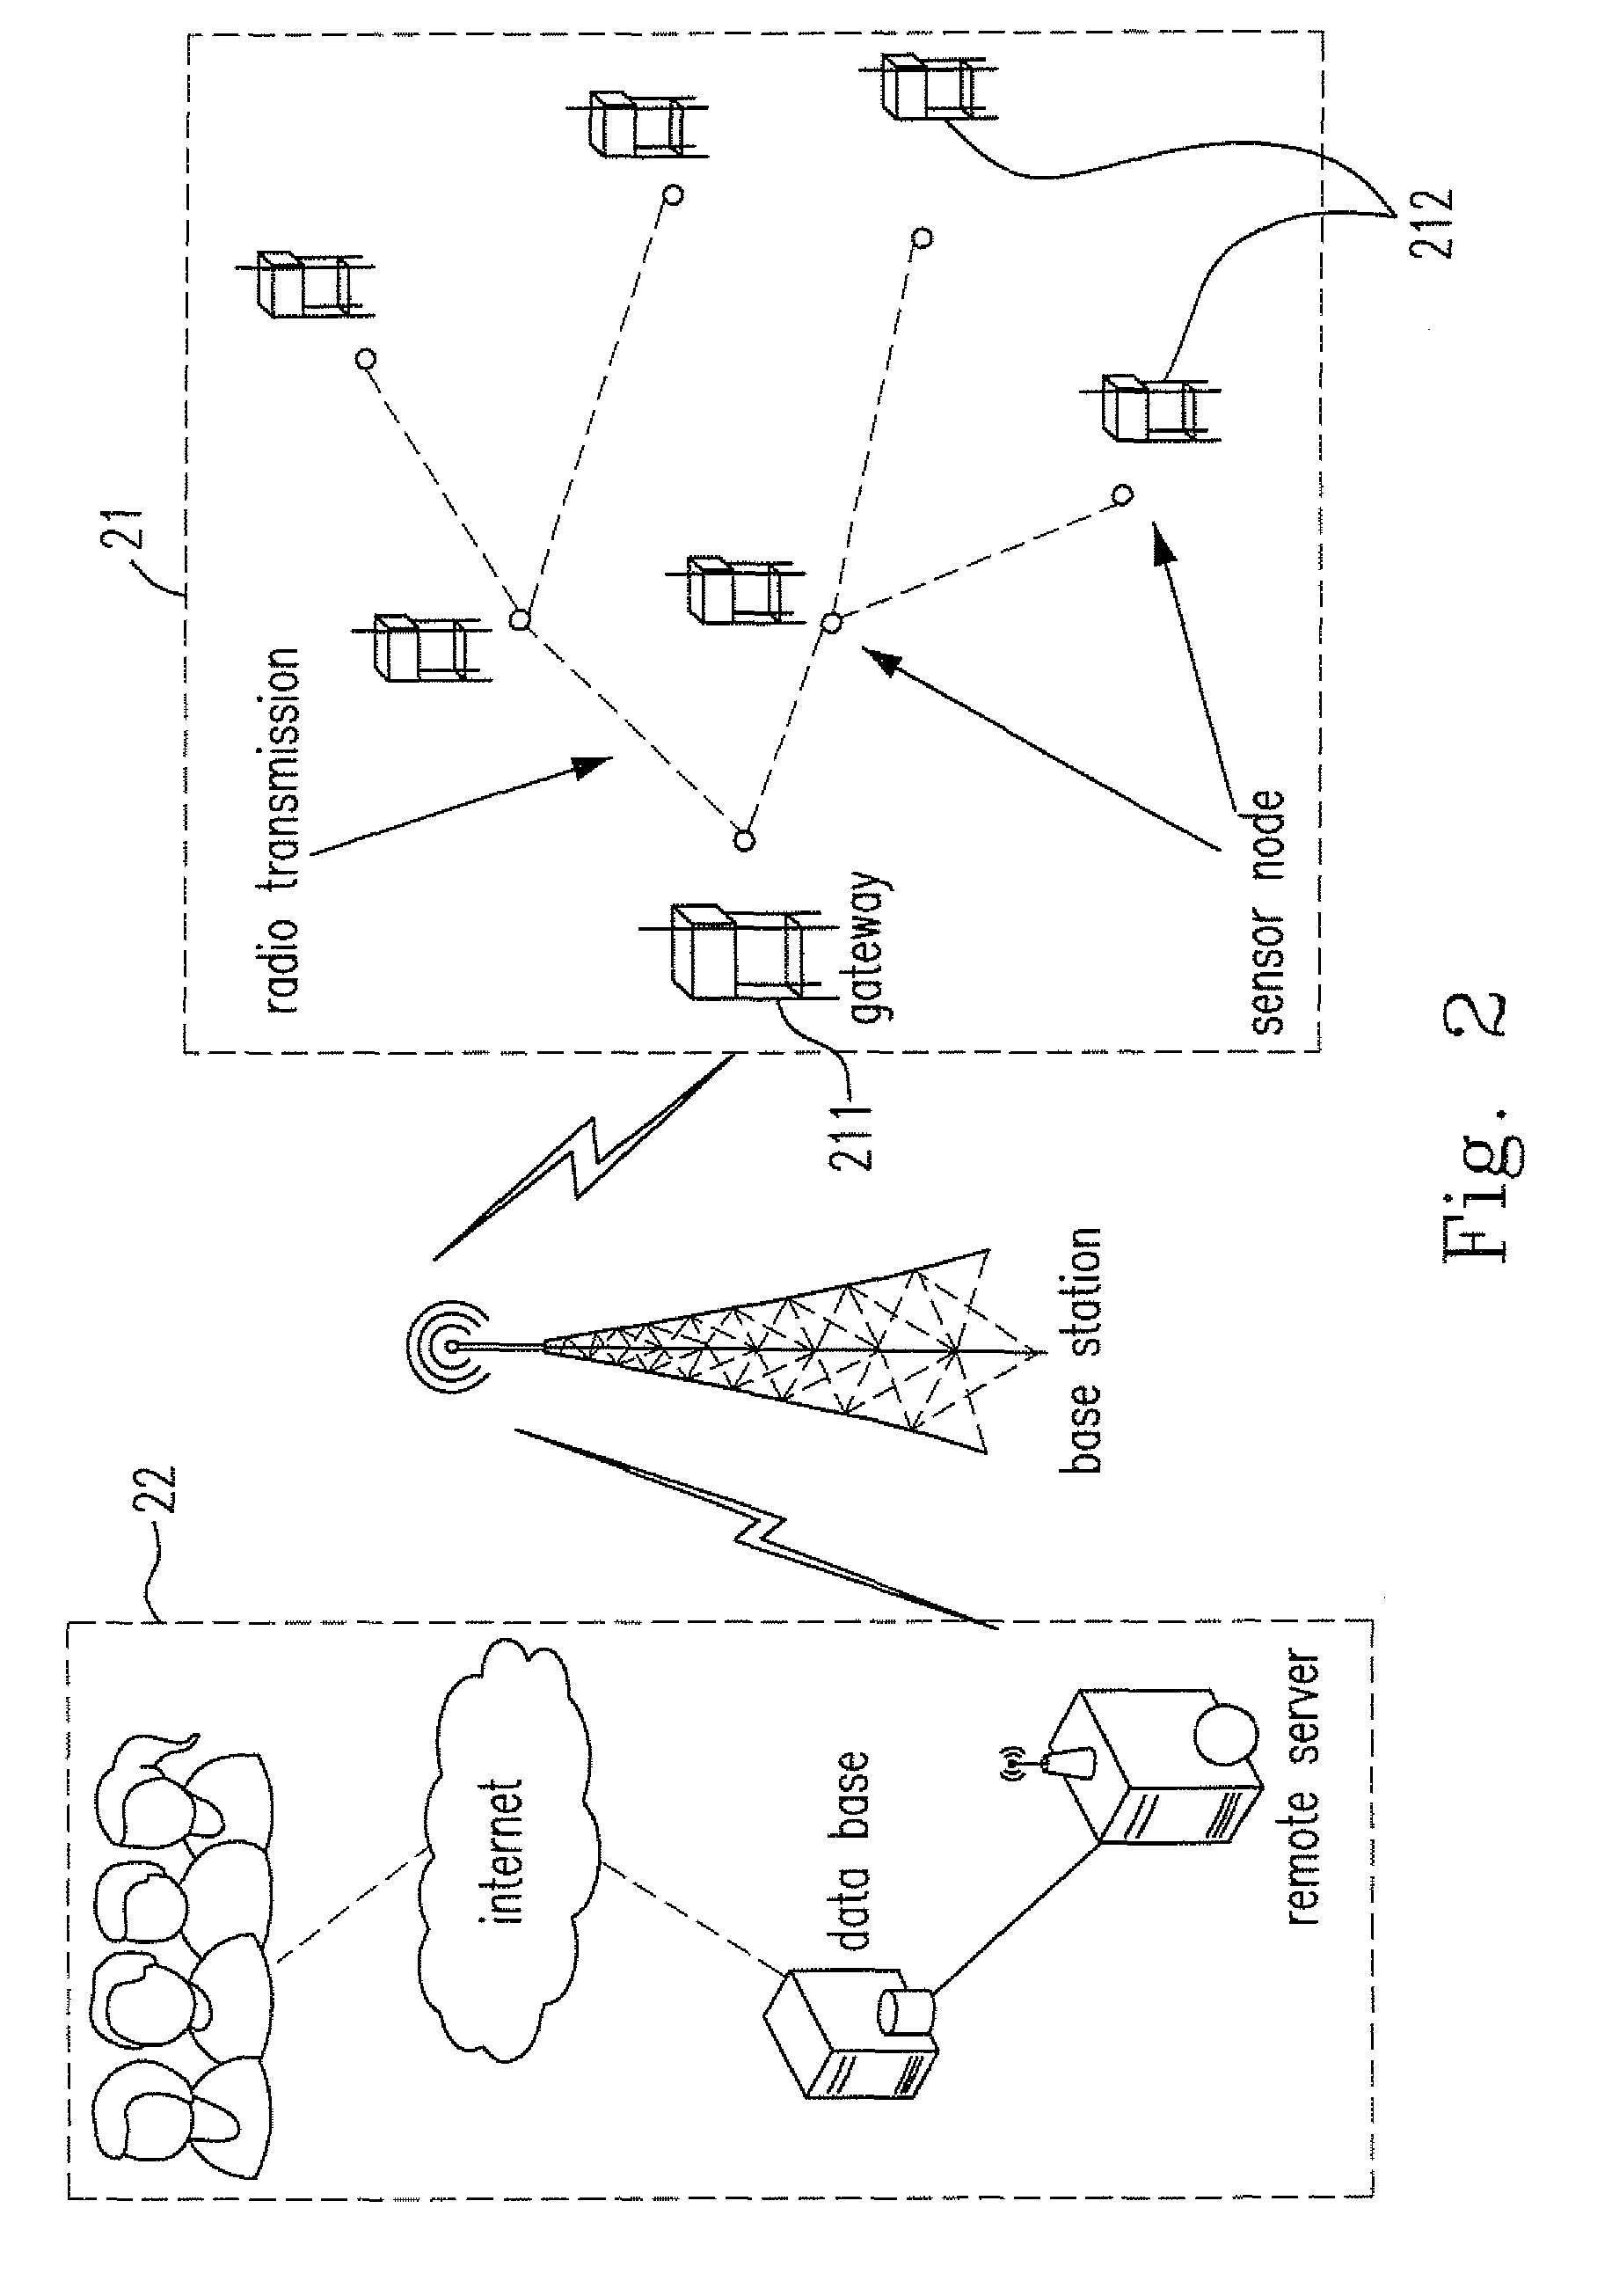 Automated remote water quality monitoring system with wireless communication capabilities and the method thereof